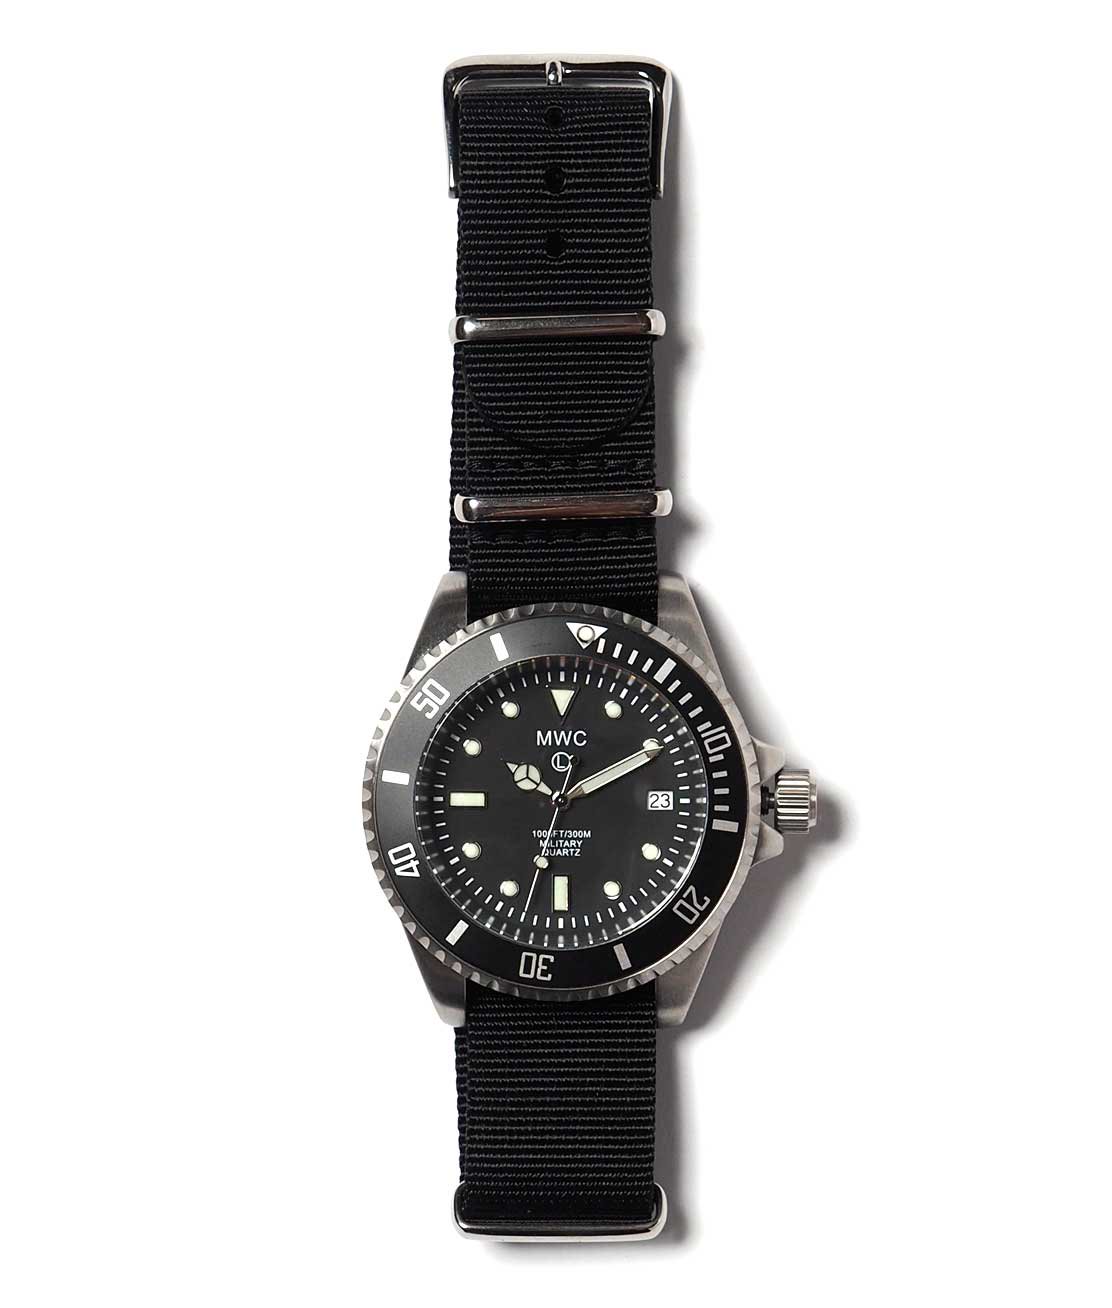 MWC】MWC SPECIAL DIVER WATCH - GREY ダイバーズウォッチ - HUNKY 